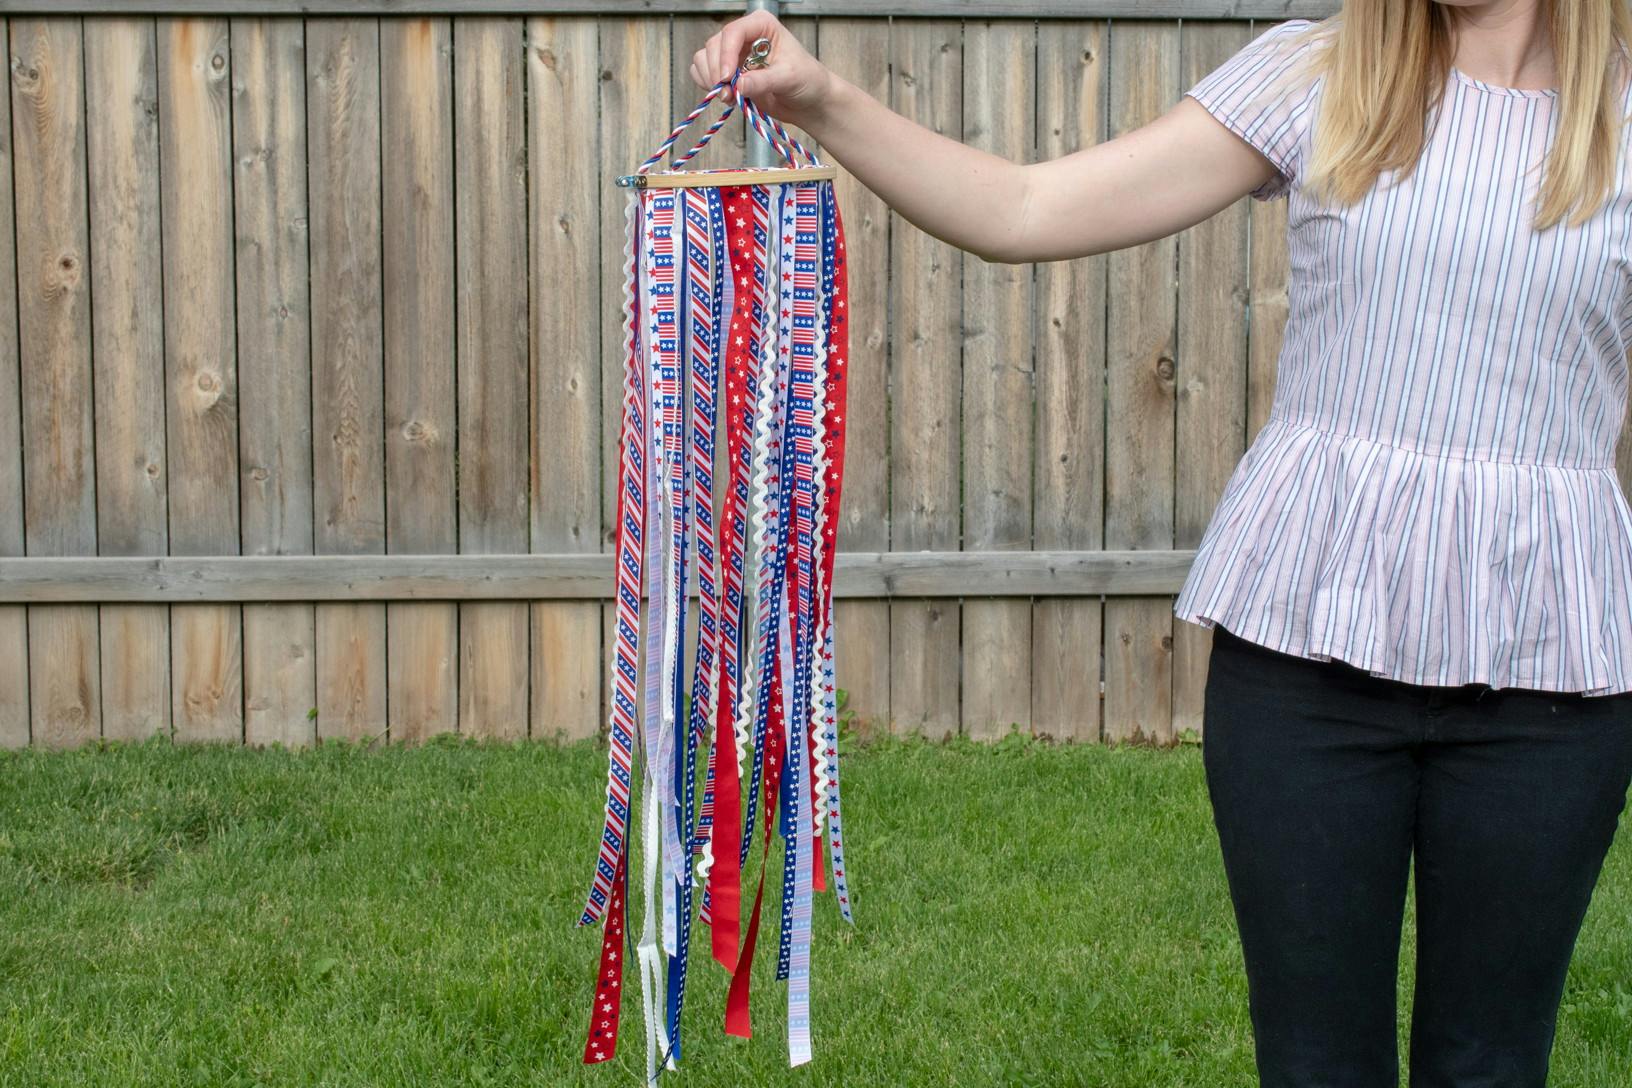 A person standing in a backyard, holding up a DIY windsock made of ribbon and an embroidery hoop.